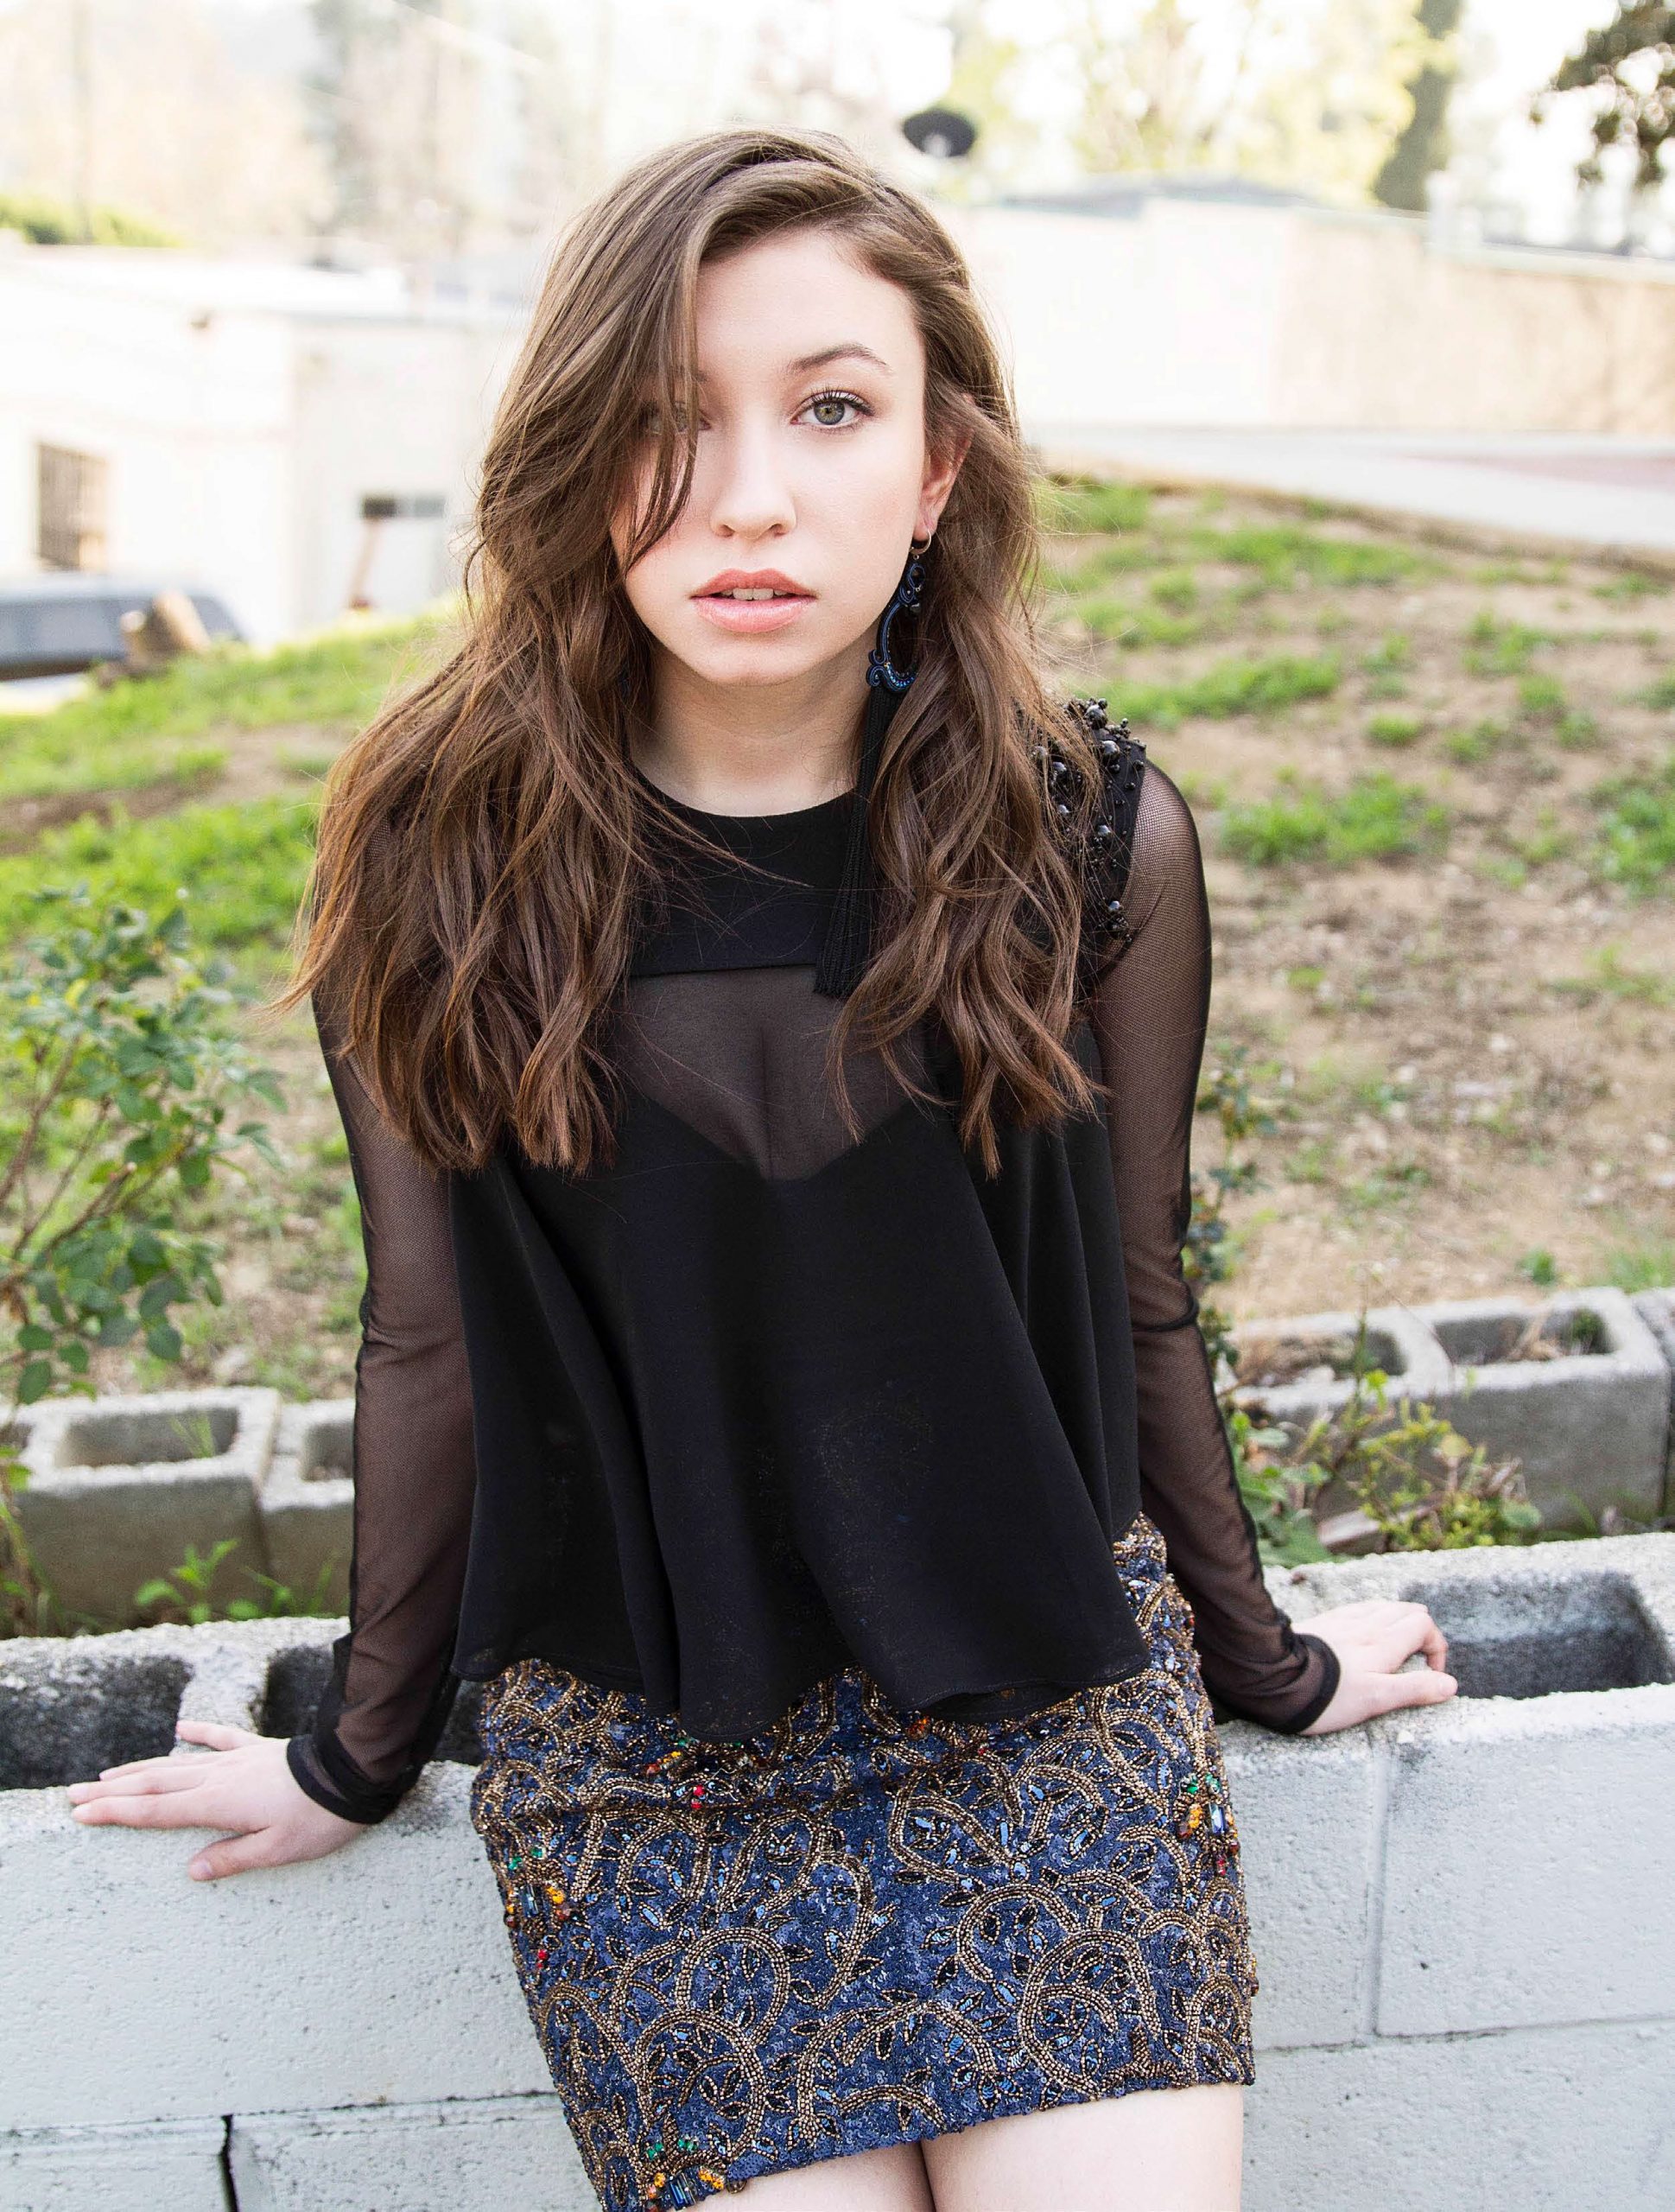 50 Katelyn Nacon Nude Pictures Which Prove Beauty Beyond Recognition 54